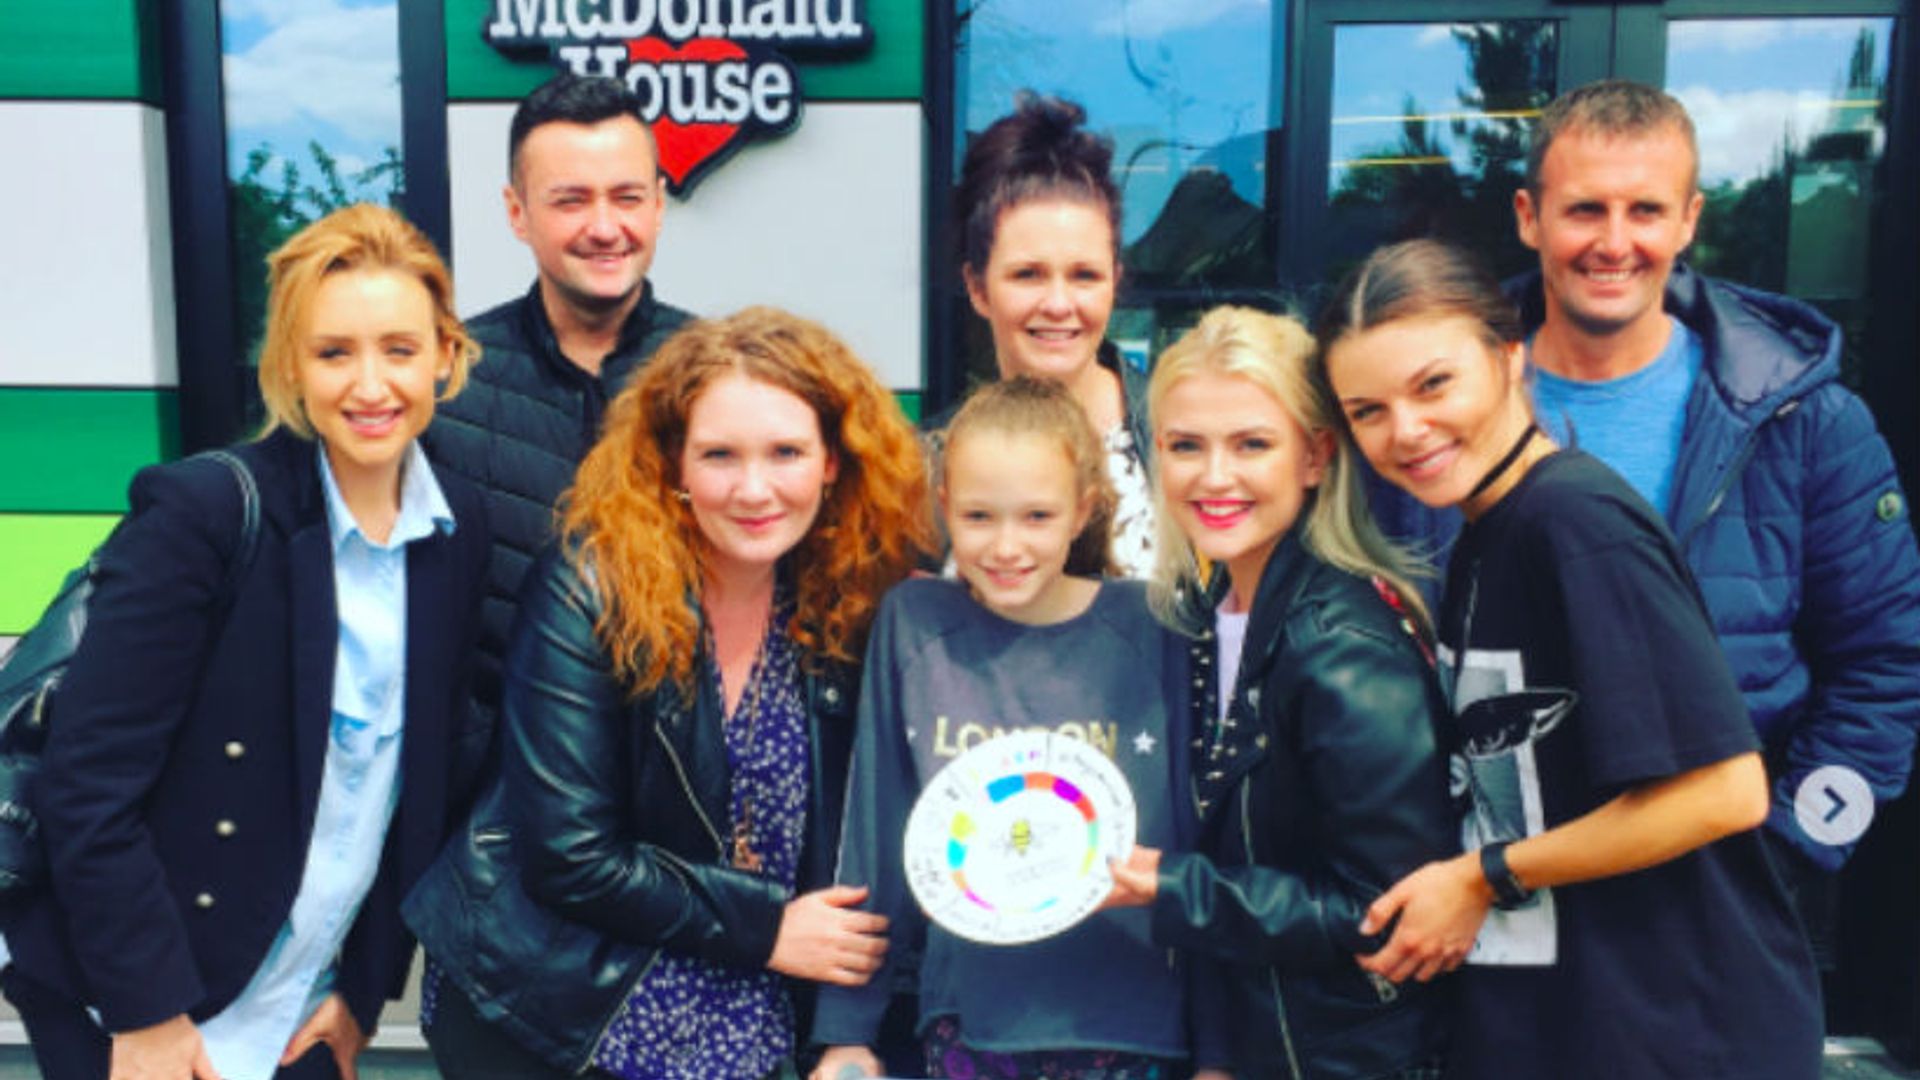 Coronation Street cast visit victims of the Manchester terror attack